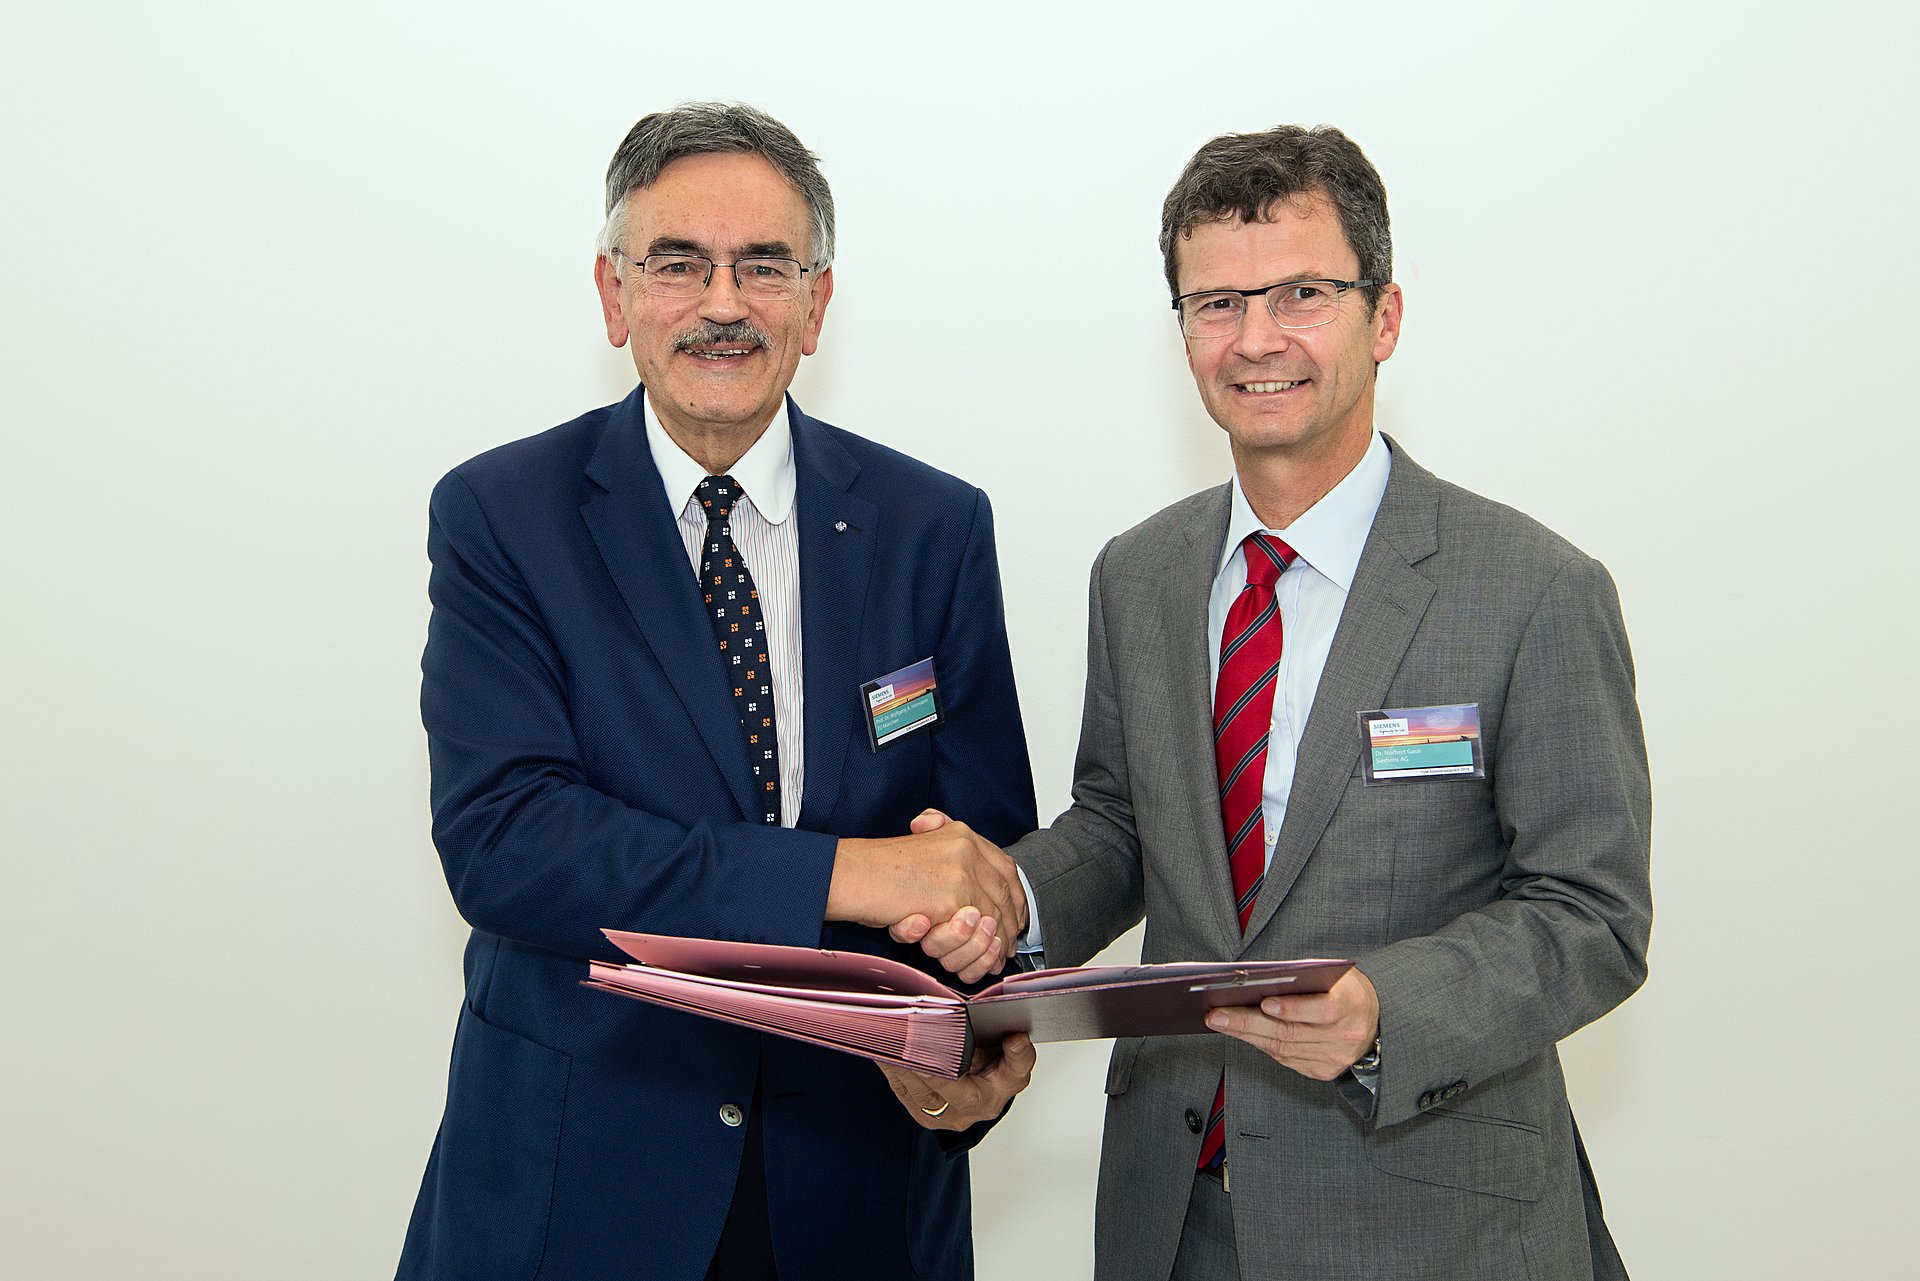 Dr. Norbert Gaus of the Siemens AG (right) and TUM President Prof. Wolfgang A. Herrmann after signing the funding agreement. (Picture: Benz / TUM)